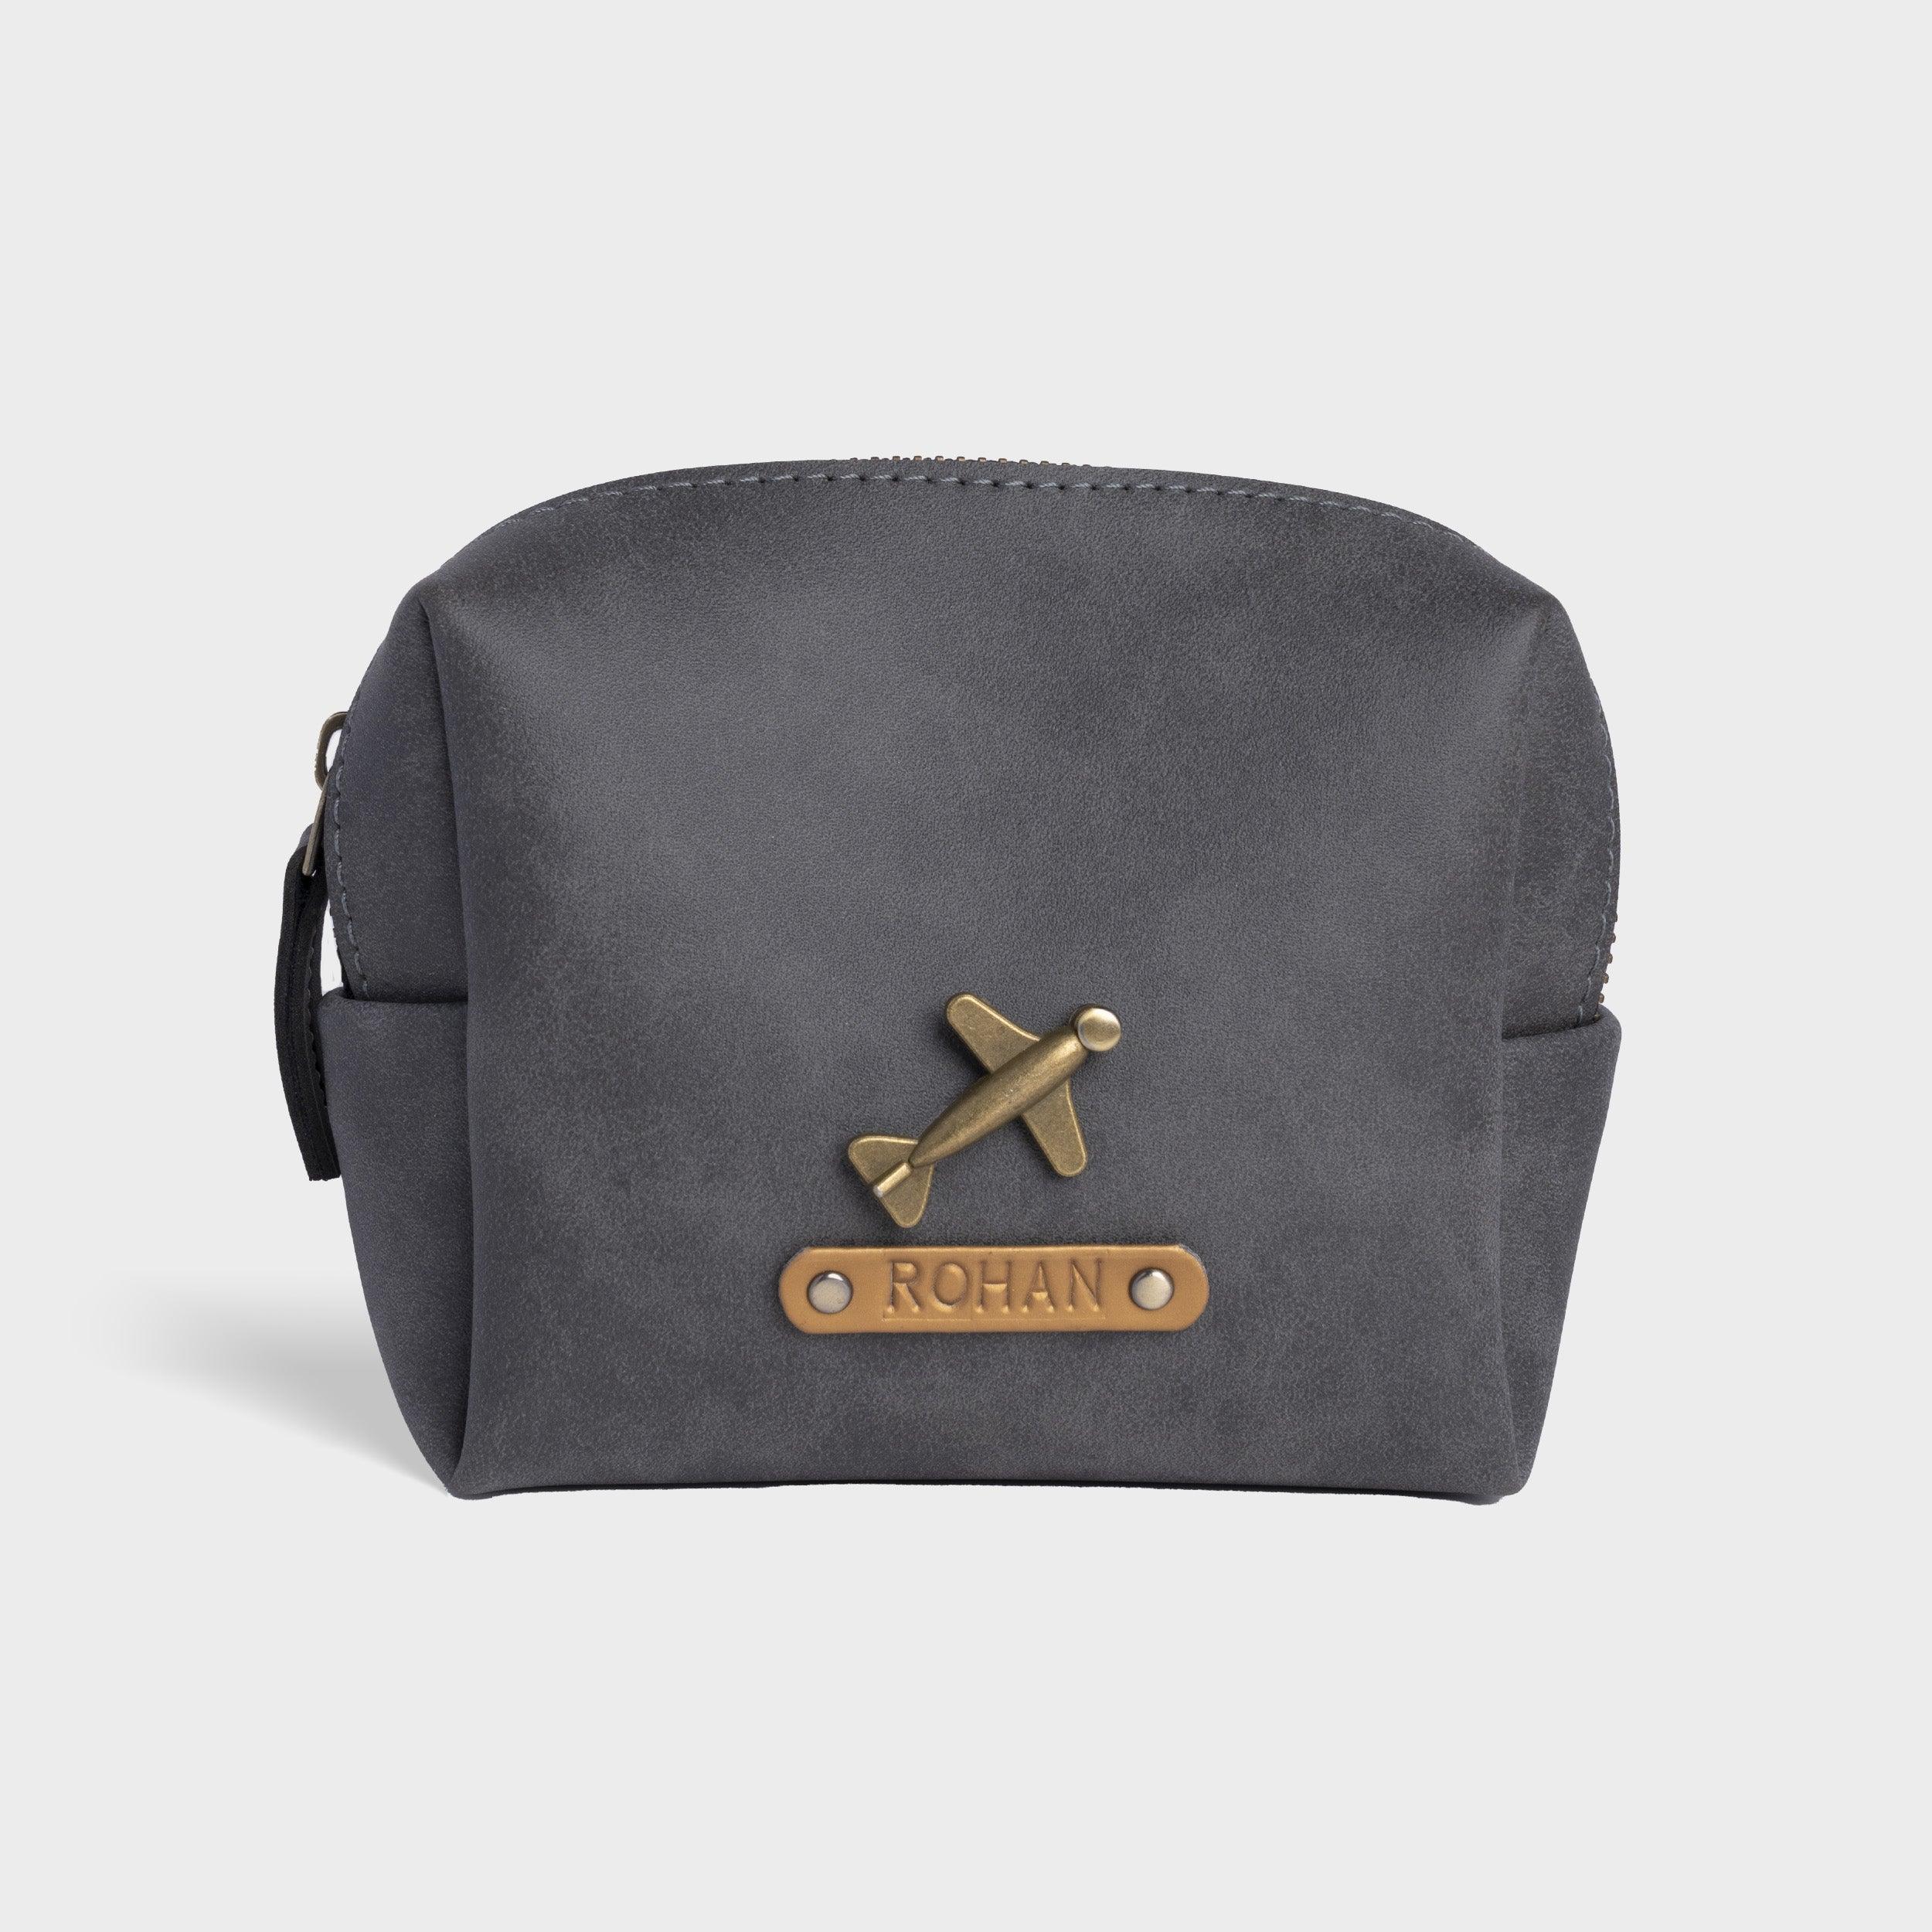 Daily Travel Pouch - Travelsleek